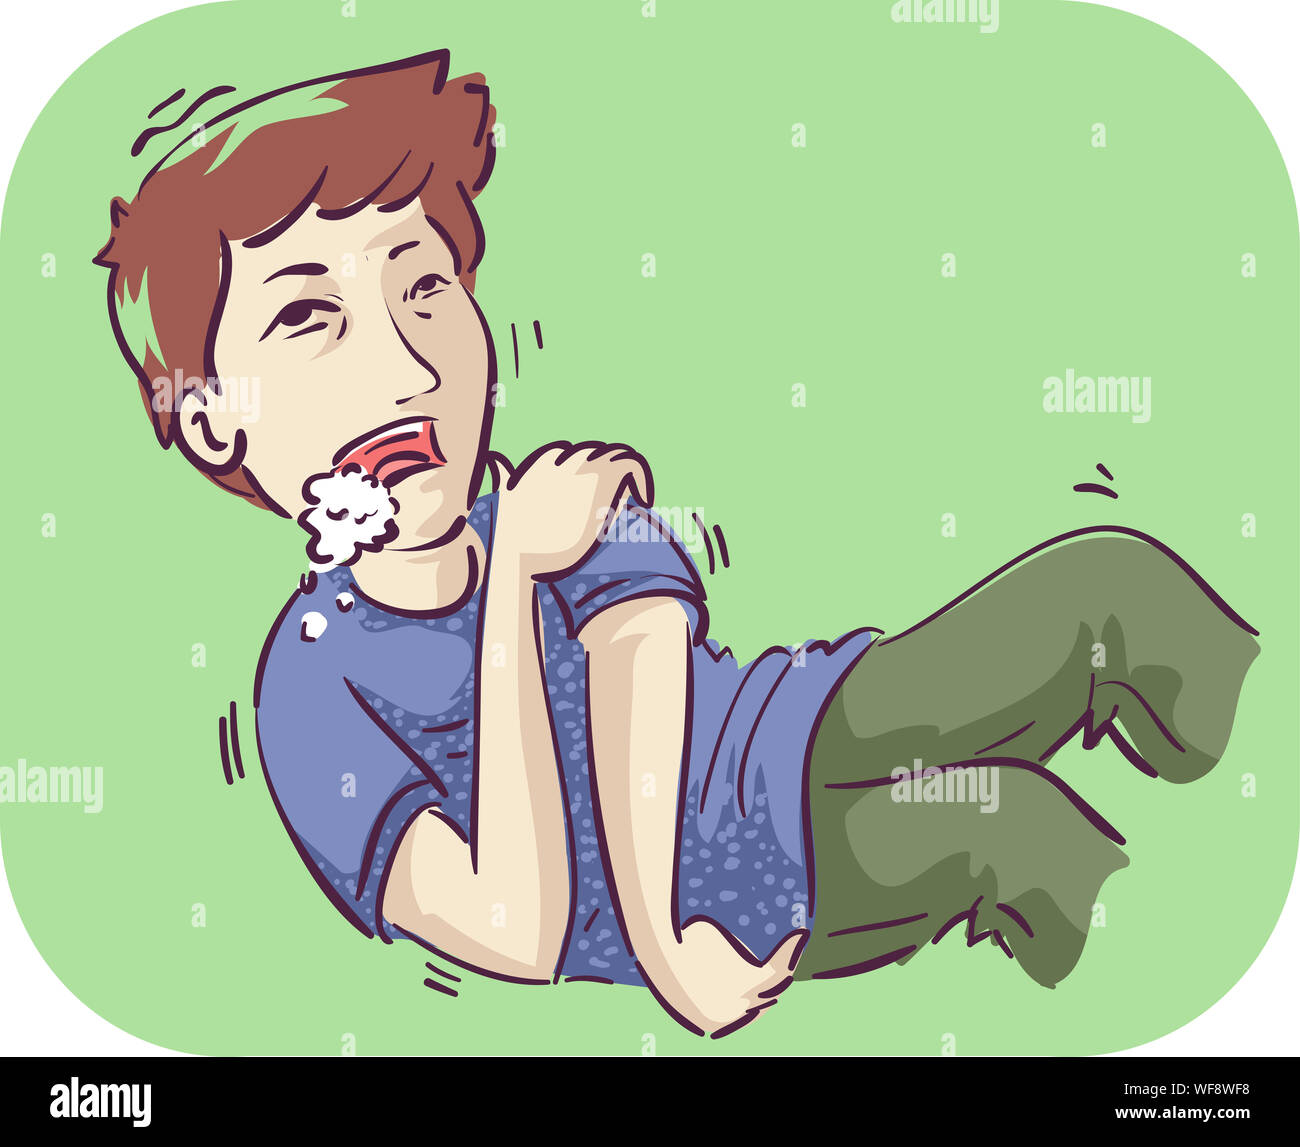 Illustration of a Man Having Epilepsy with Bubbles Coming Out of Mouth and Lying Down on the Floor Stock Photo